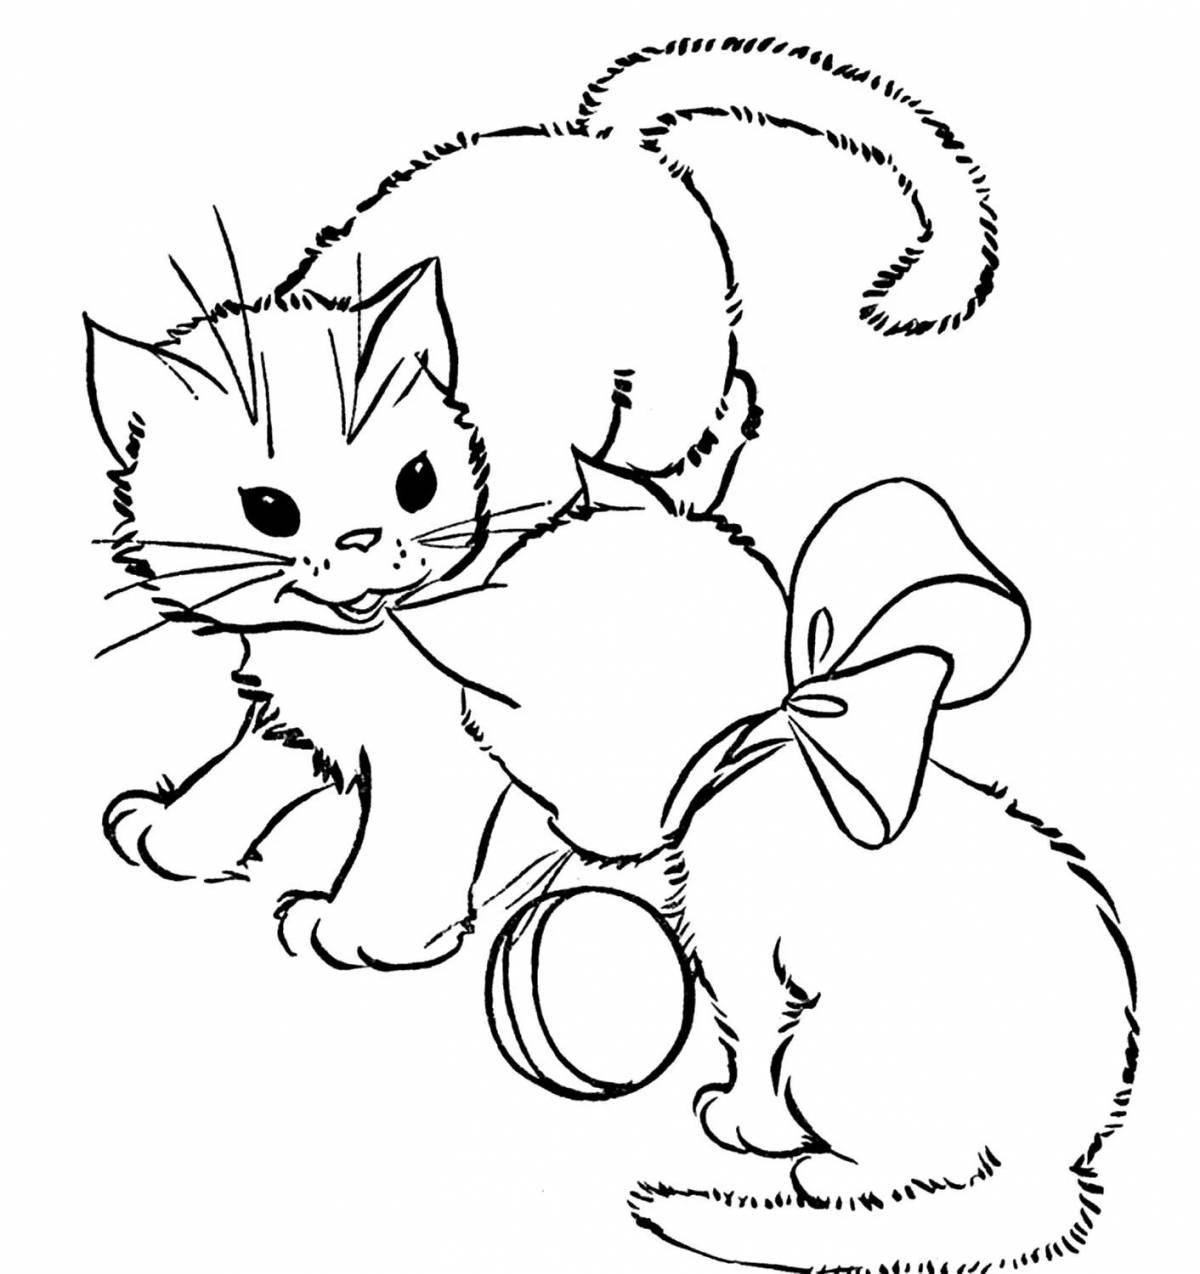 Colorful 7 year old kitten coloring page